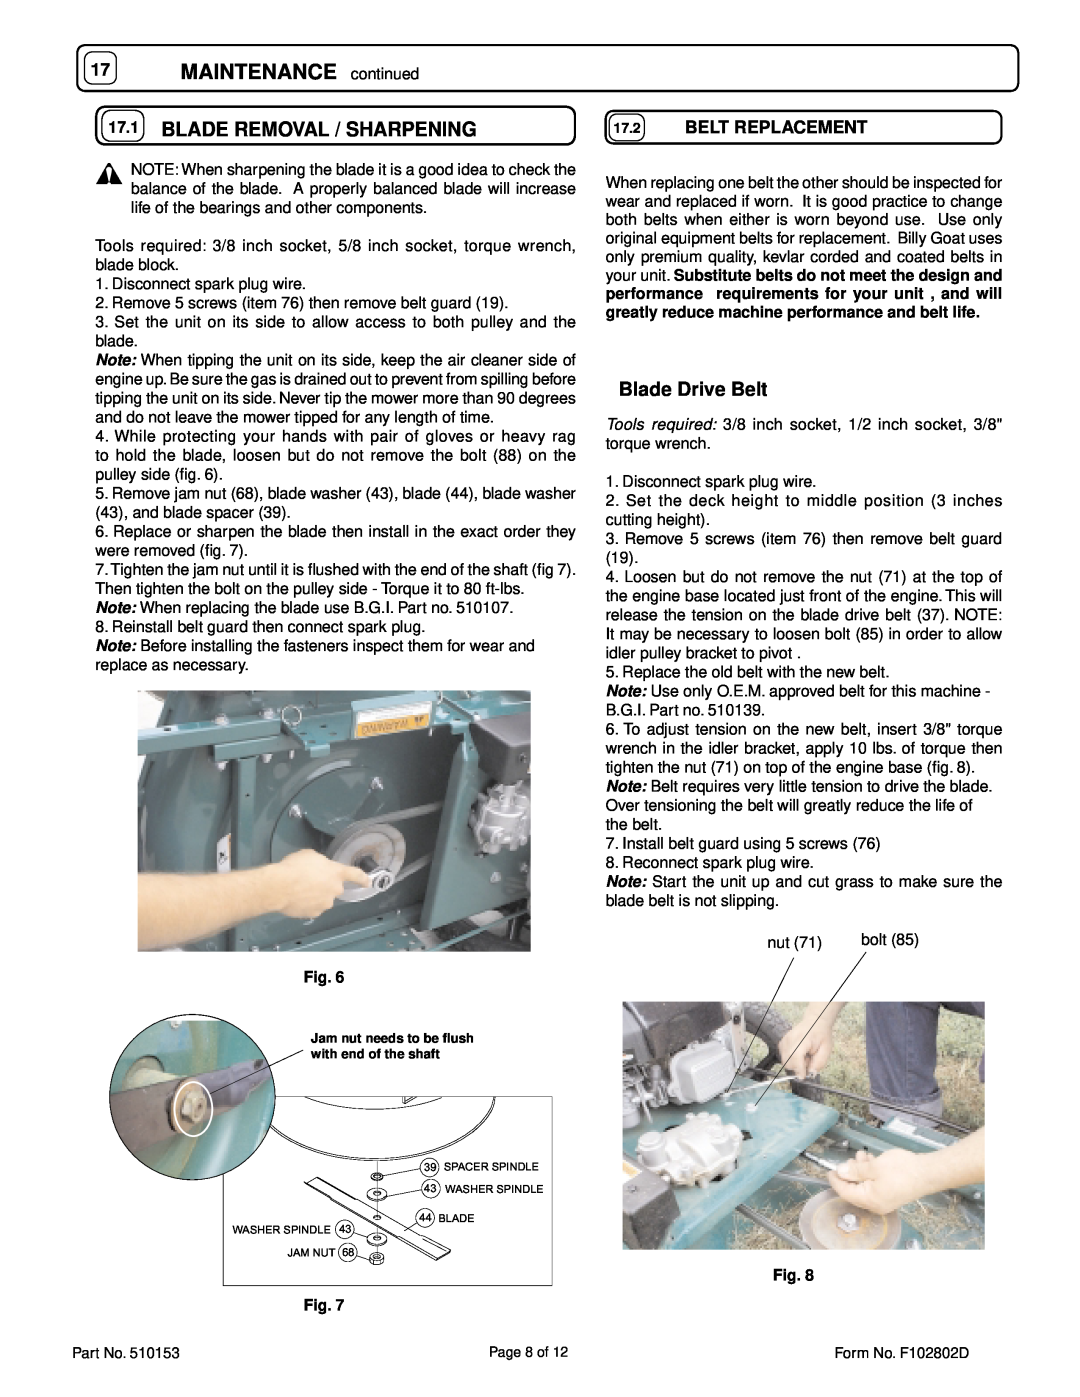 Billy Goat HW650SP owner manual MAINTENANCE continued, Blade Removal / Sharpening, Blade Drive Belt, Belt Replacement 